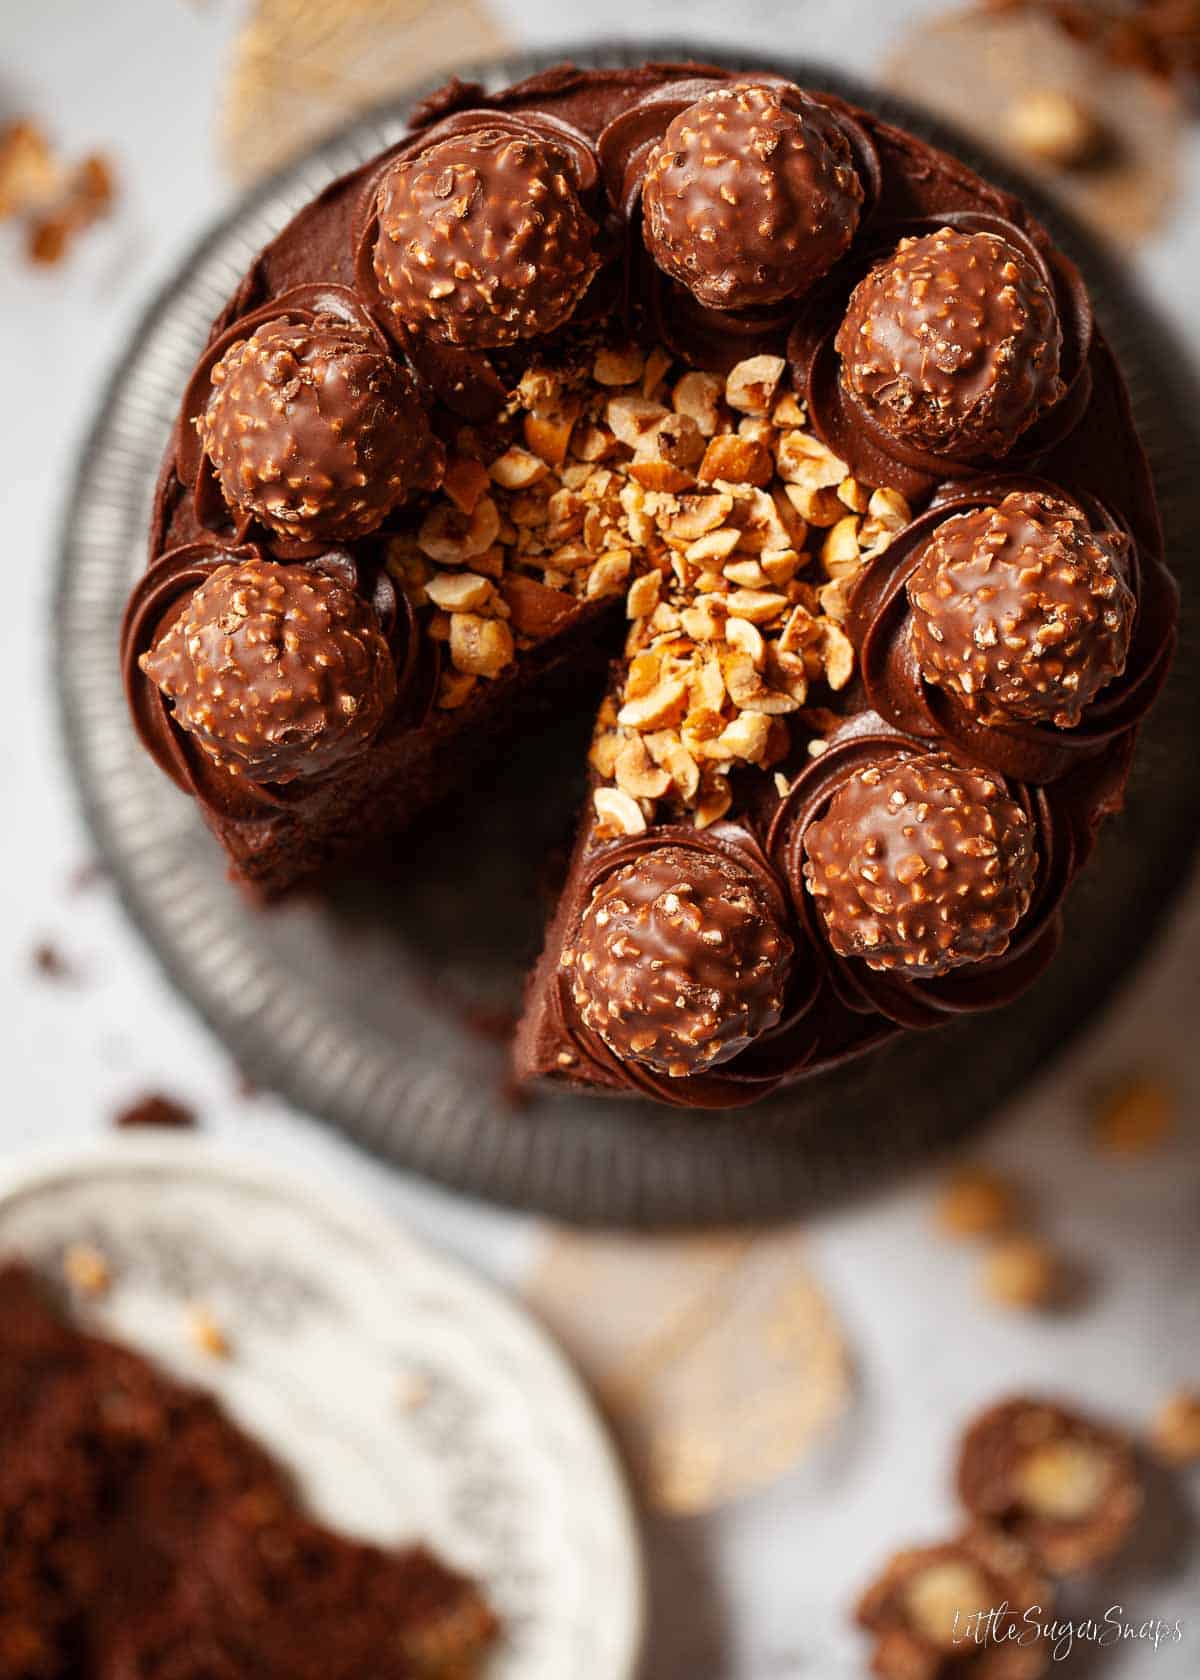 A Ferrero Rocher Cake topped with hazelnuts and chocolates with a slice cut out